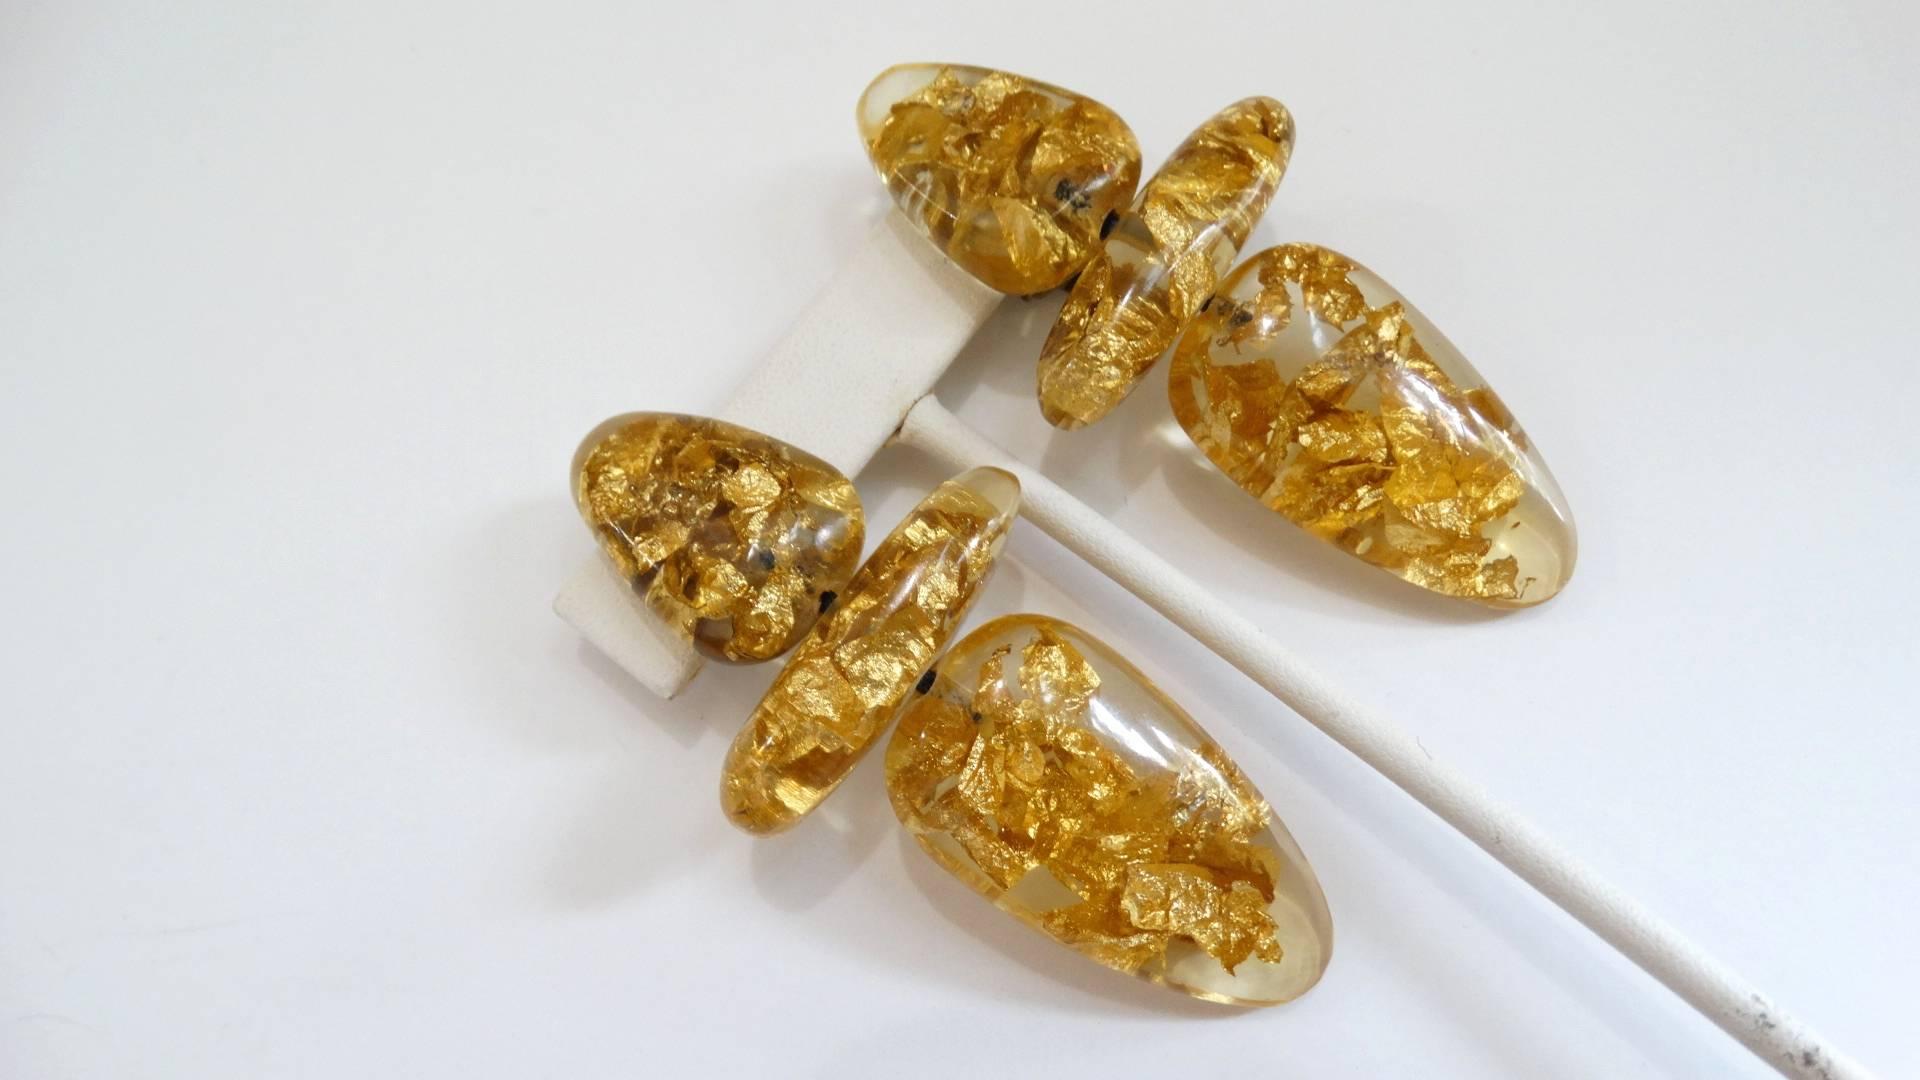 We're obsessed with these amazing 1980s gold leaf lucite earrings from jewelry designer Monies! Each earring made of shimmering gold leaf suspended in crystal clear lucite charms, set to stun day or night! Gold metal clip on backs. Signed Monies at